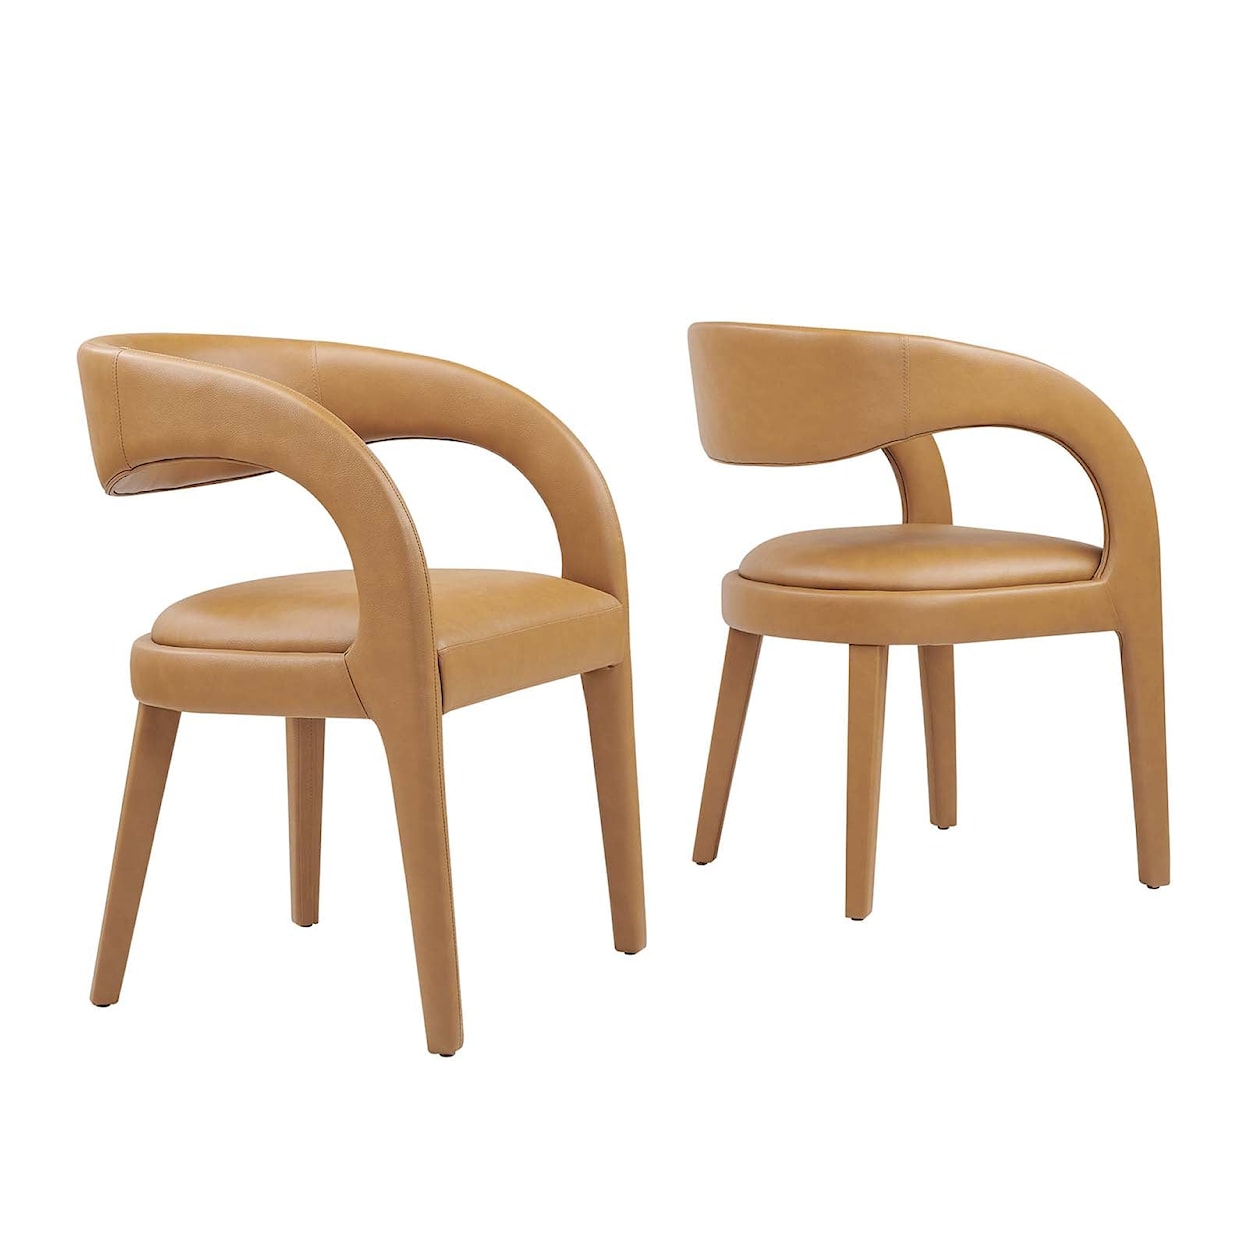 Modway Pinnacle Dining Chair